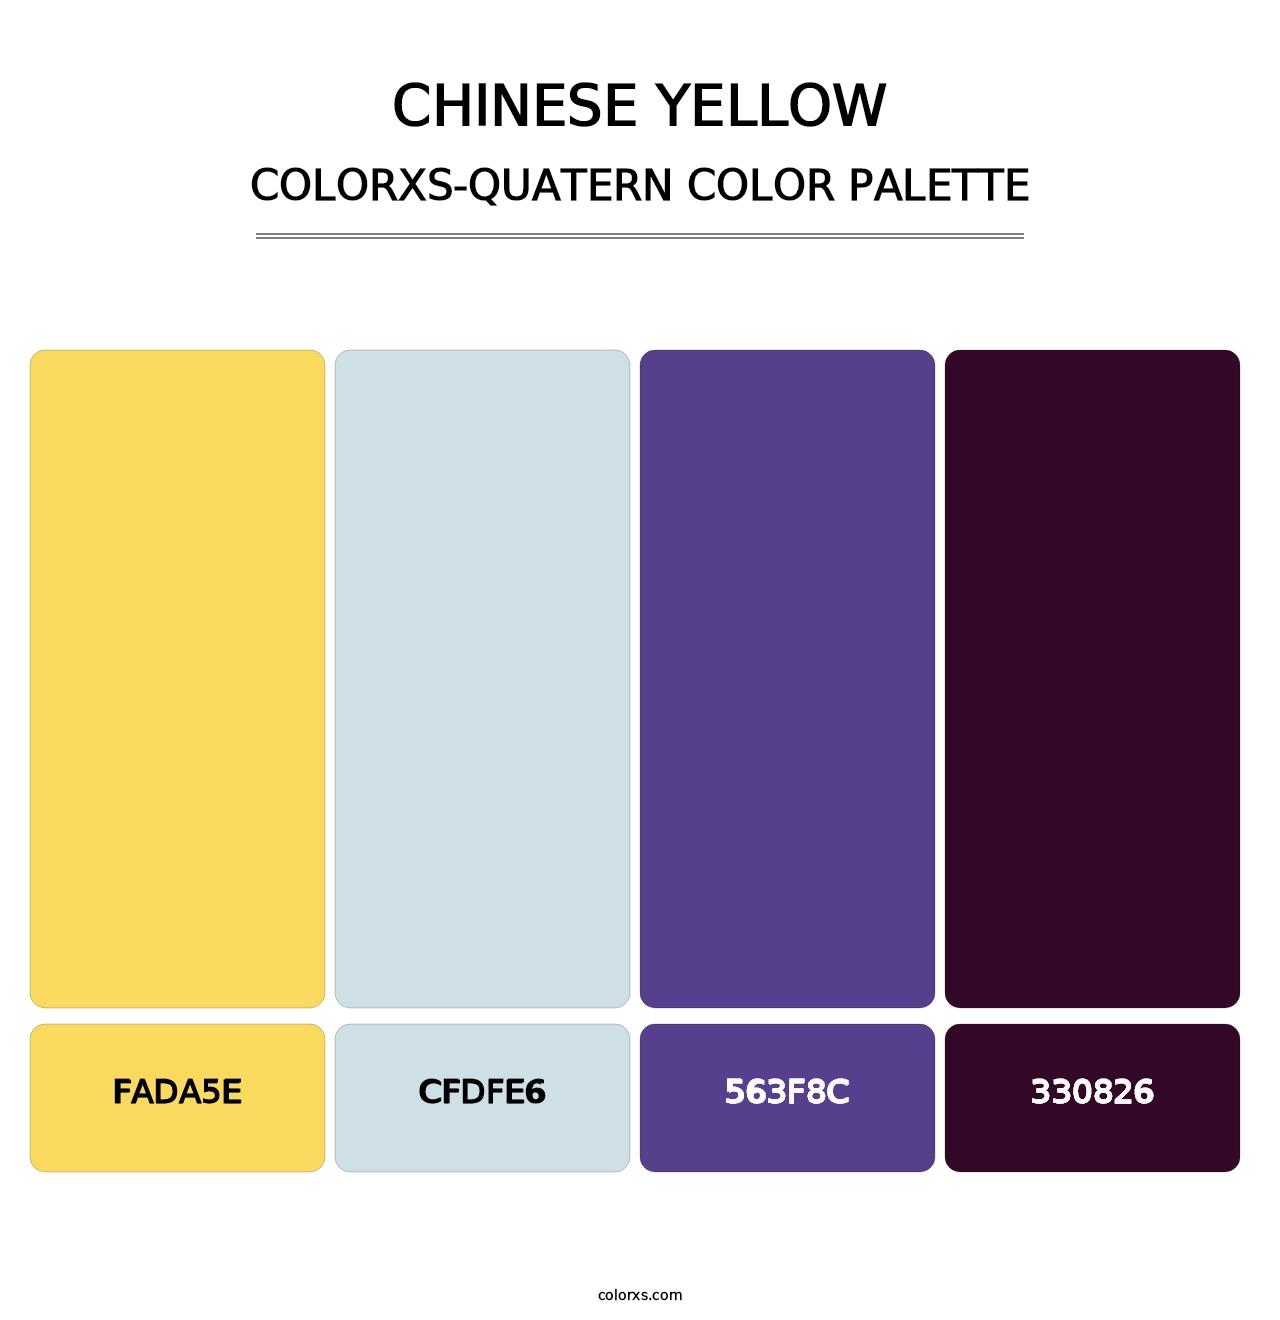 Chinese Yellow - Colorxs Quatern Palette